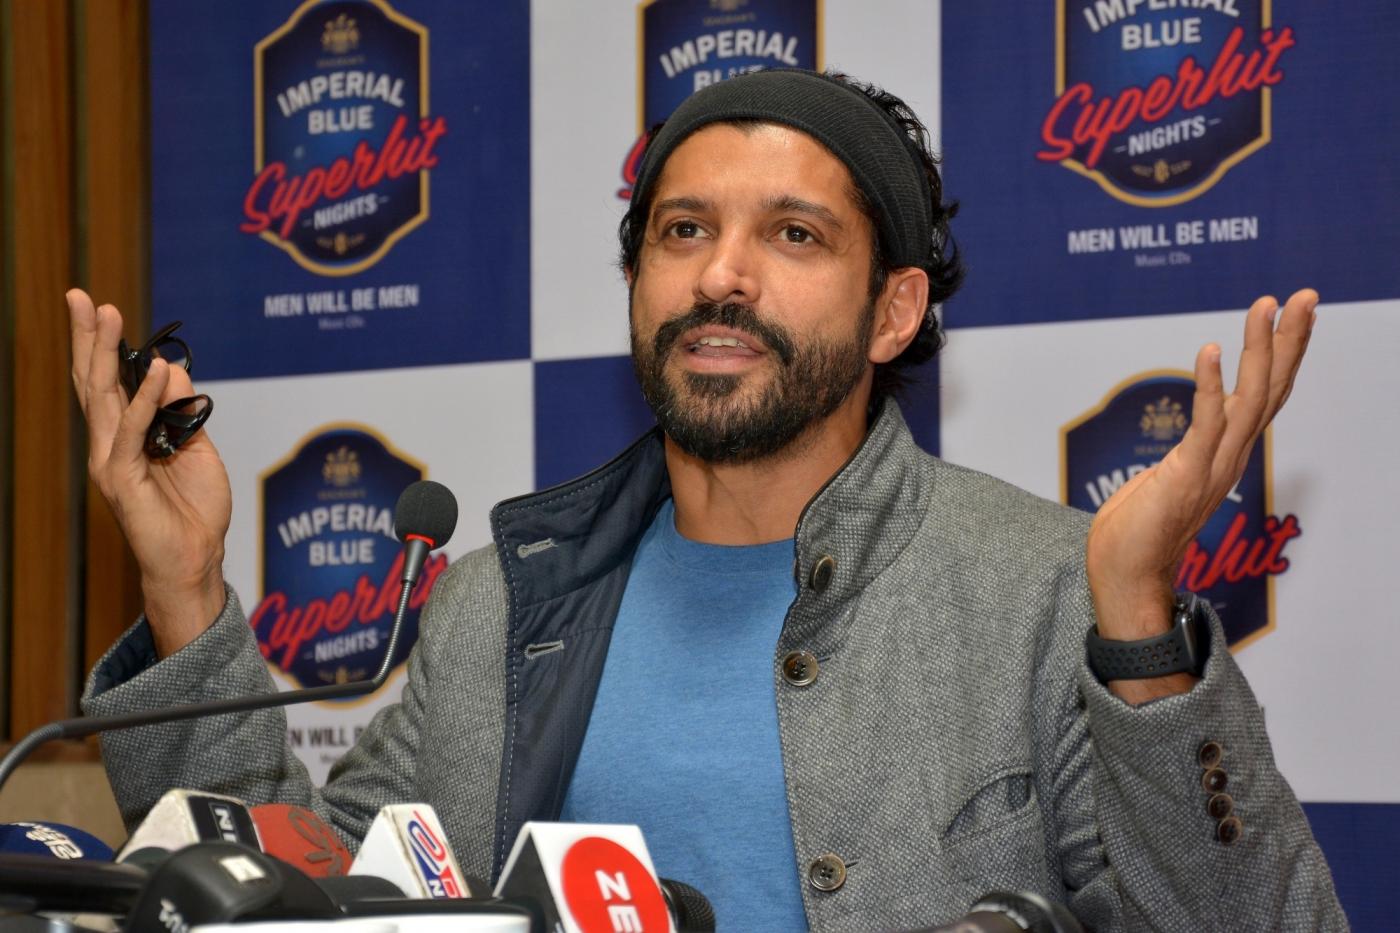 Jaipur: Actor Farhan Akhtar addresses a press conference regarding Imperial Blue Superhit Night concert, in Jaipur on Dec 17, 2017. (Photo: IANS) by .